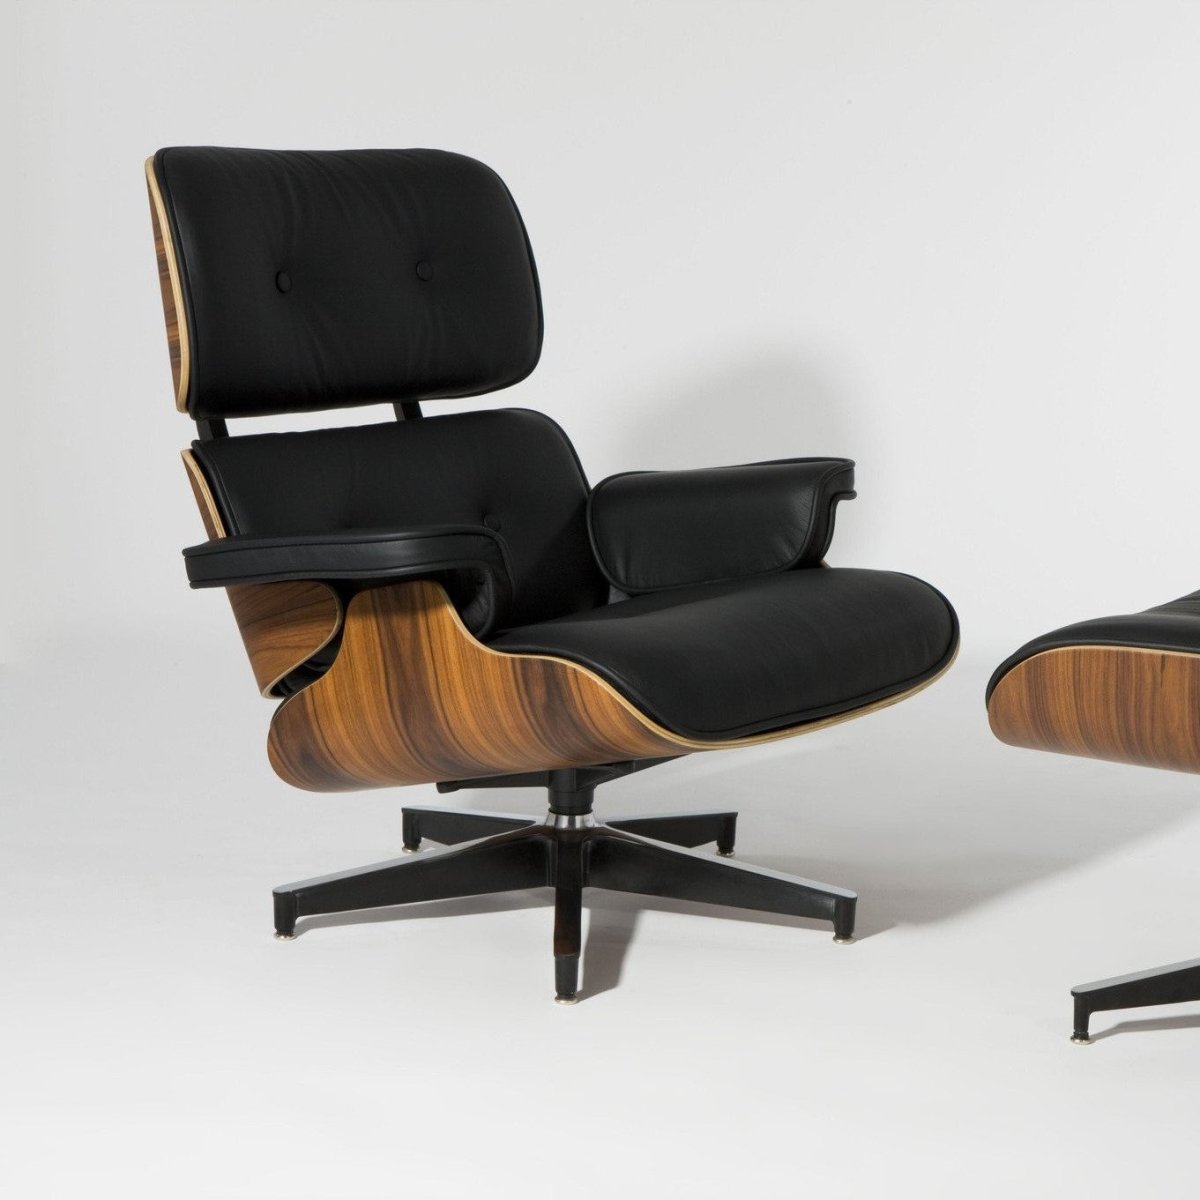 Charles and Ray Eames - Picket&Rail Furniture, Art & Baby Family Store